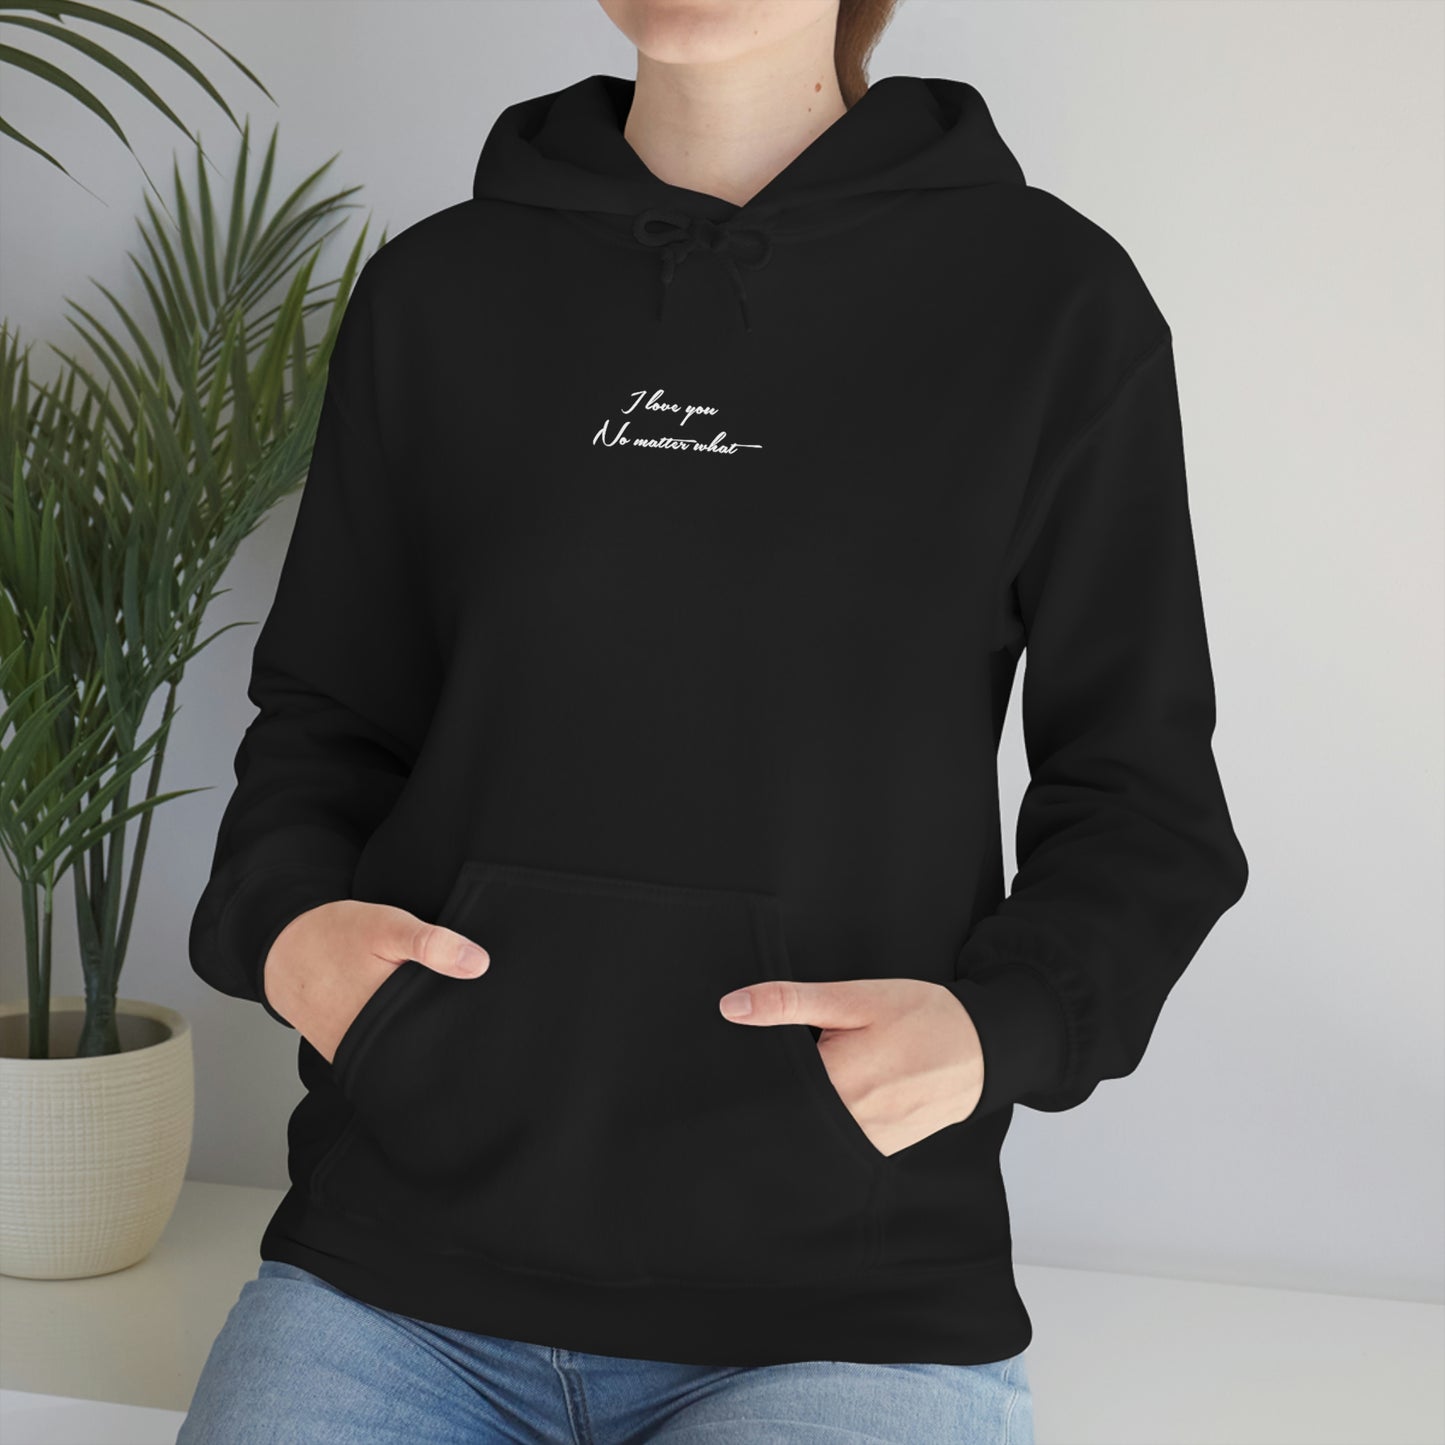 "YOU ARE ENOUGH" Hooded Sweatshirt